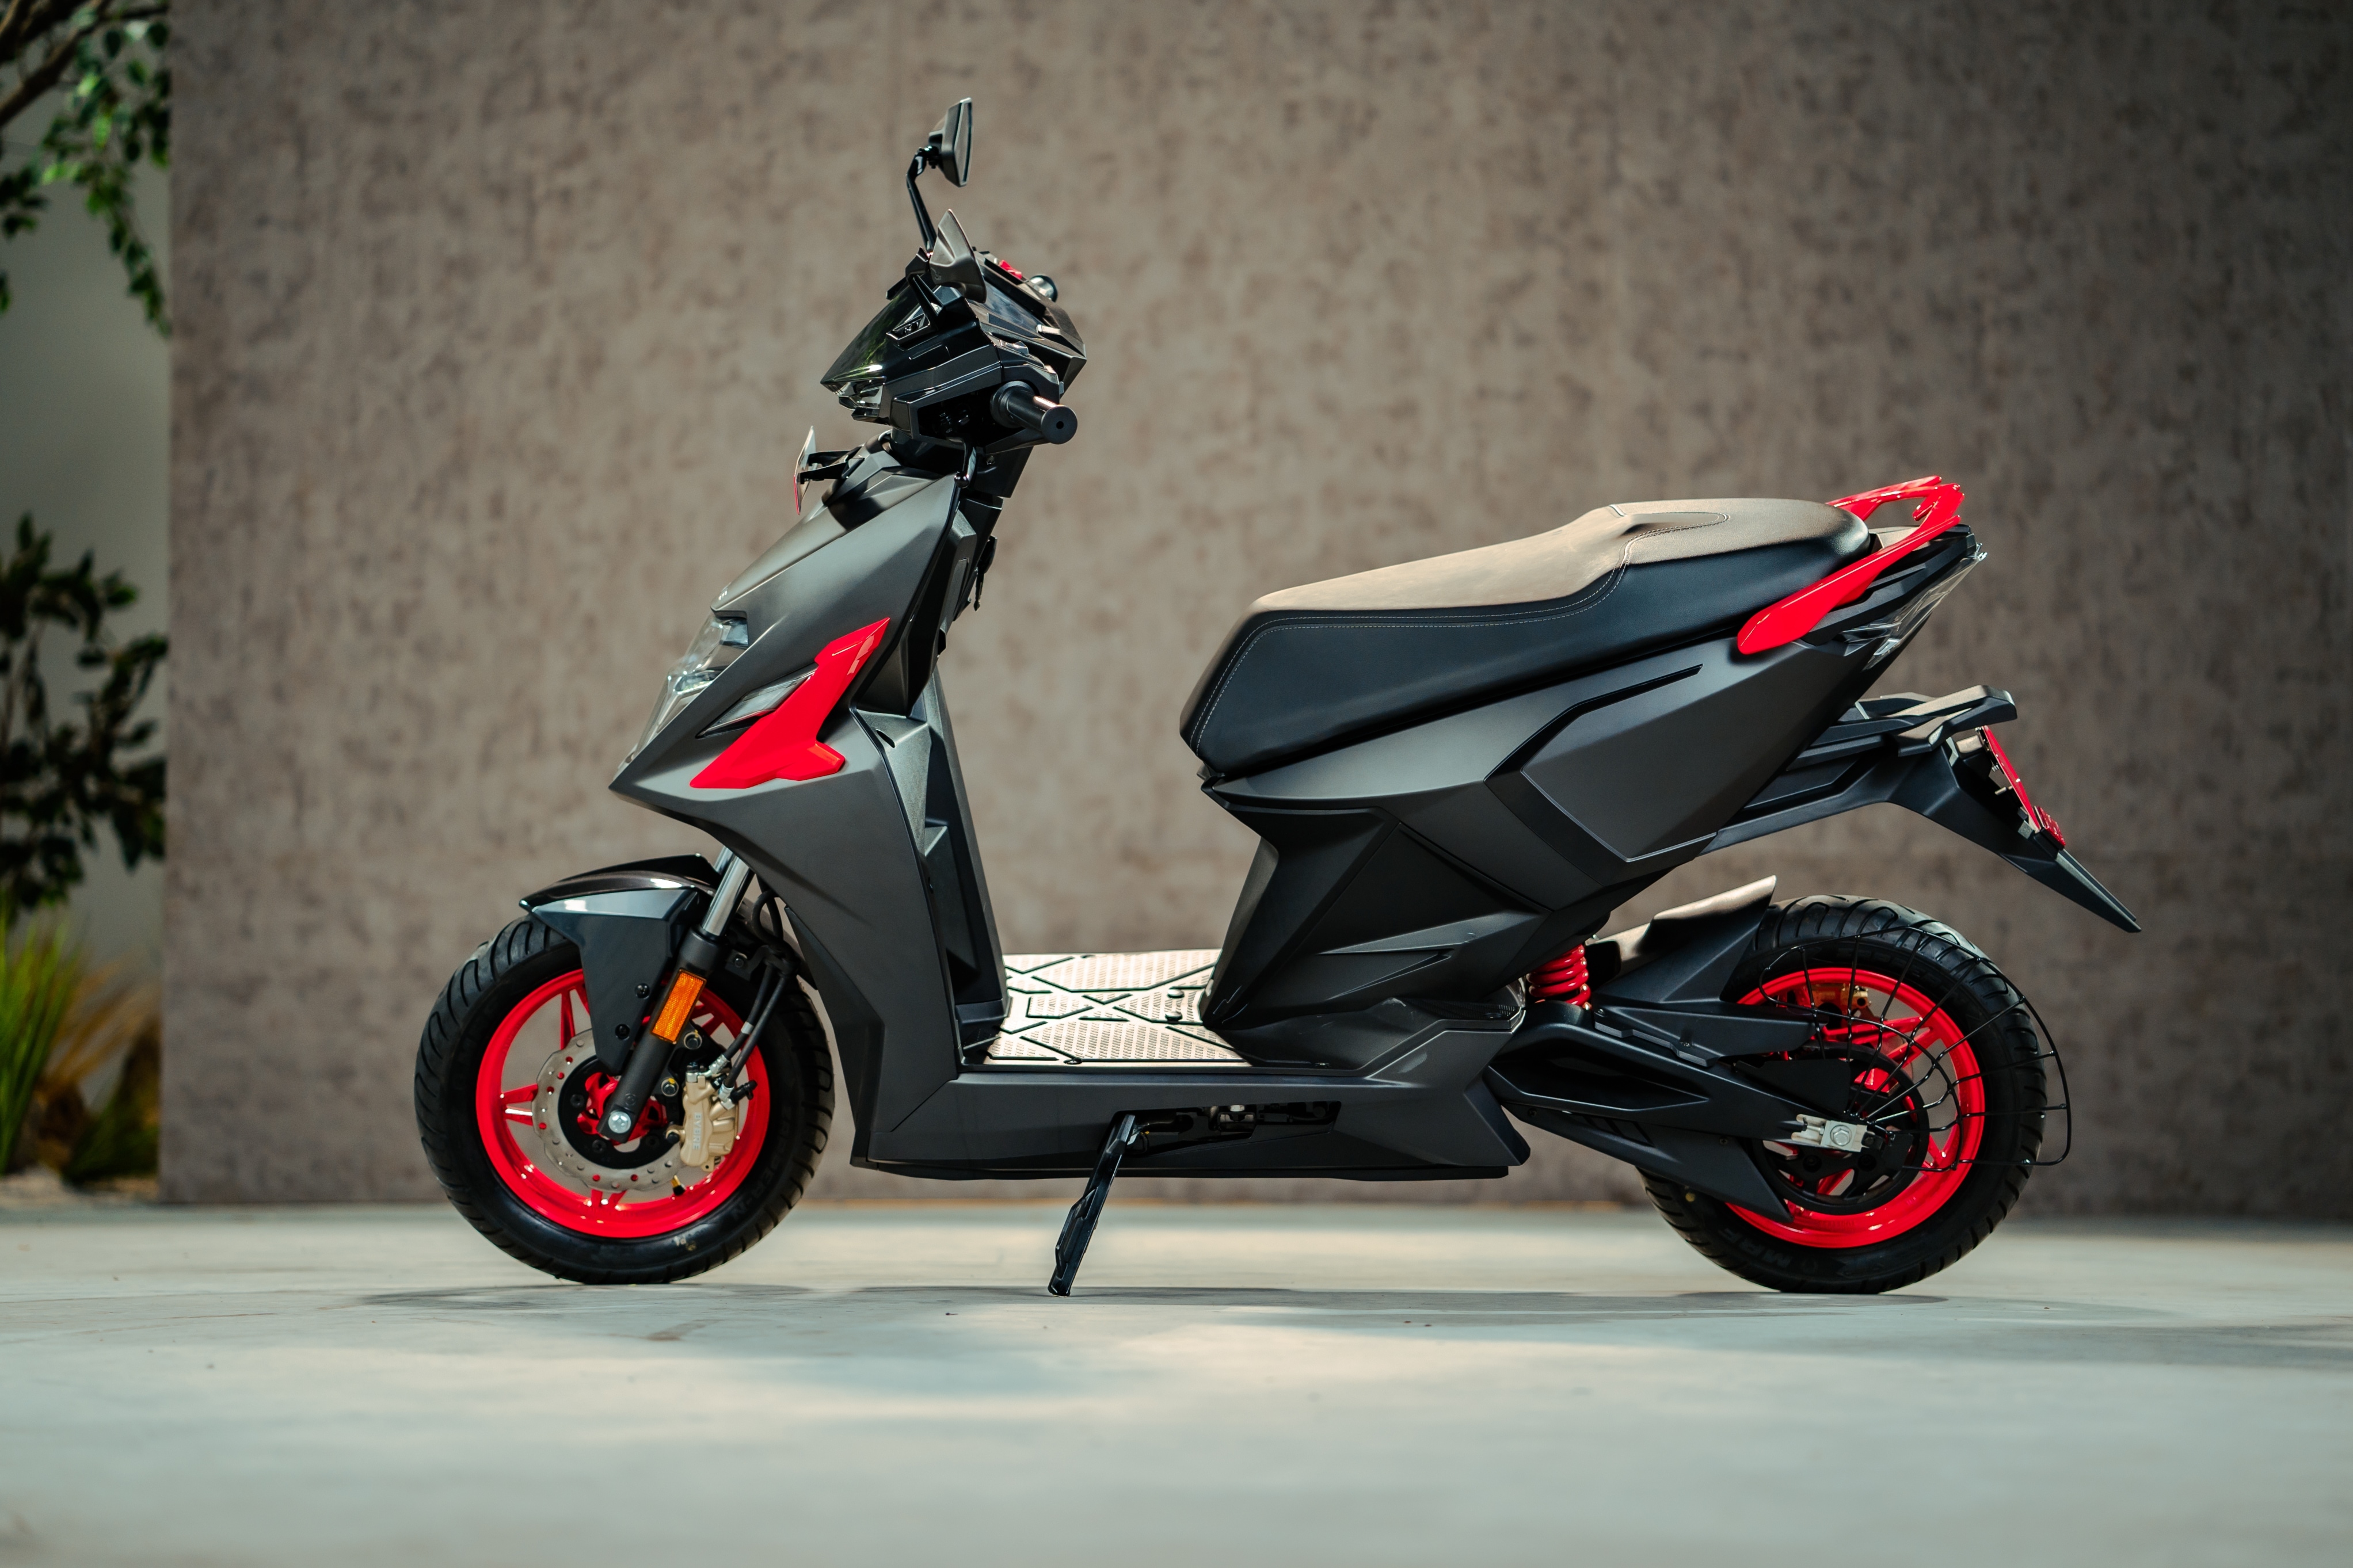 The Simple Dot One will be produced at the company's facility in Tamil Nadu and is likely to share its underpinnings with the One e-scooter